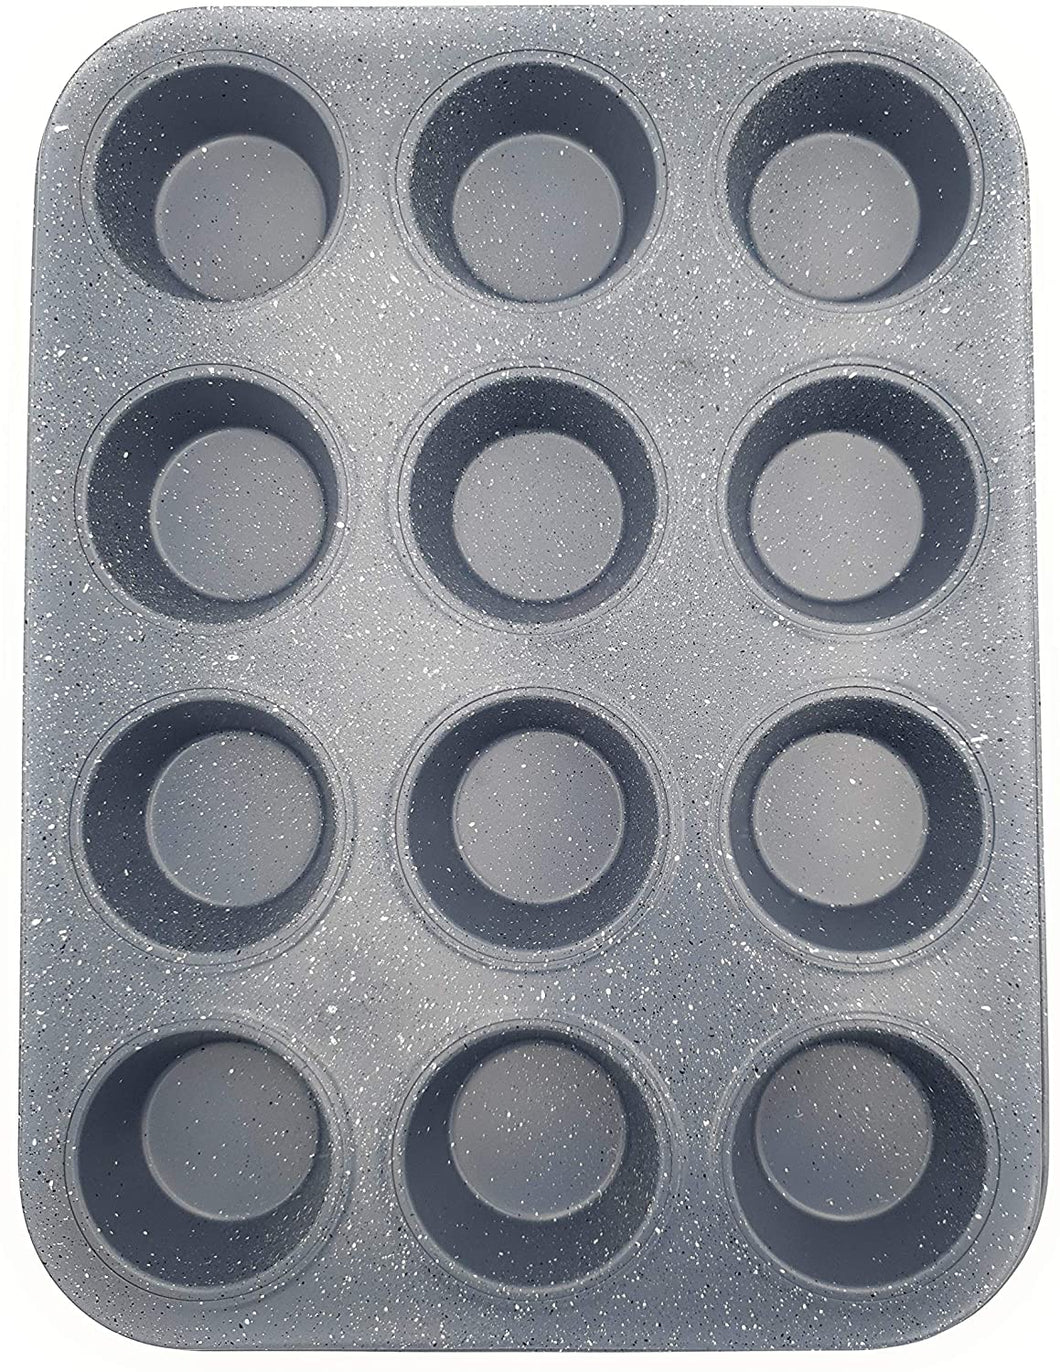 12 Cup Muffin Tray Non-Stick | Muffin Tray to Make Cupcakes, Yorkshire Pudding and Baking.